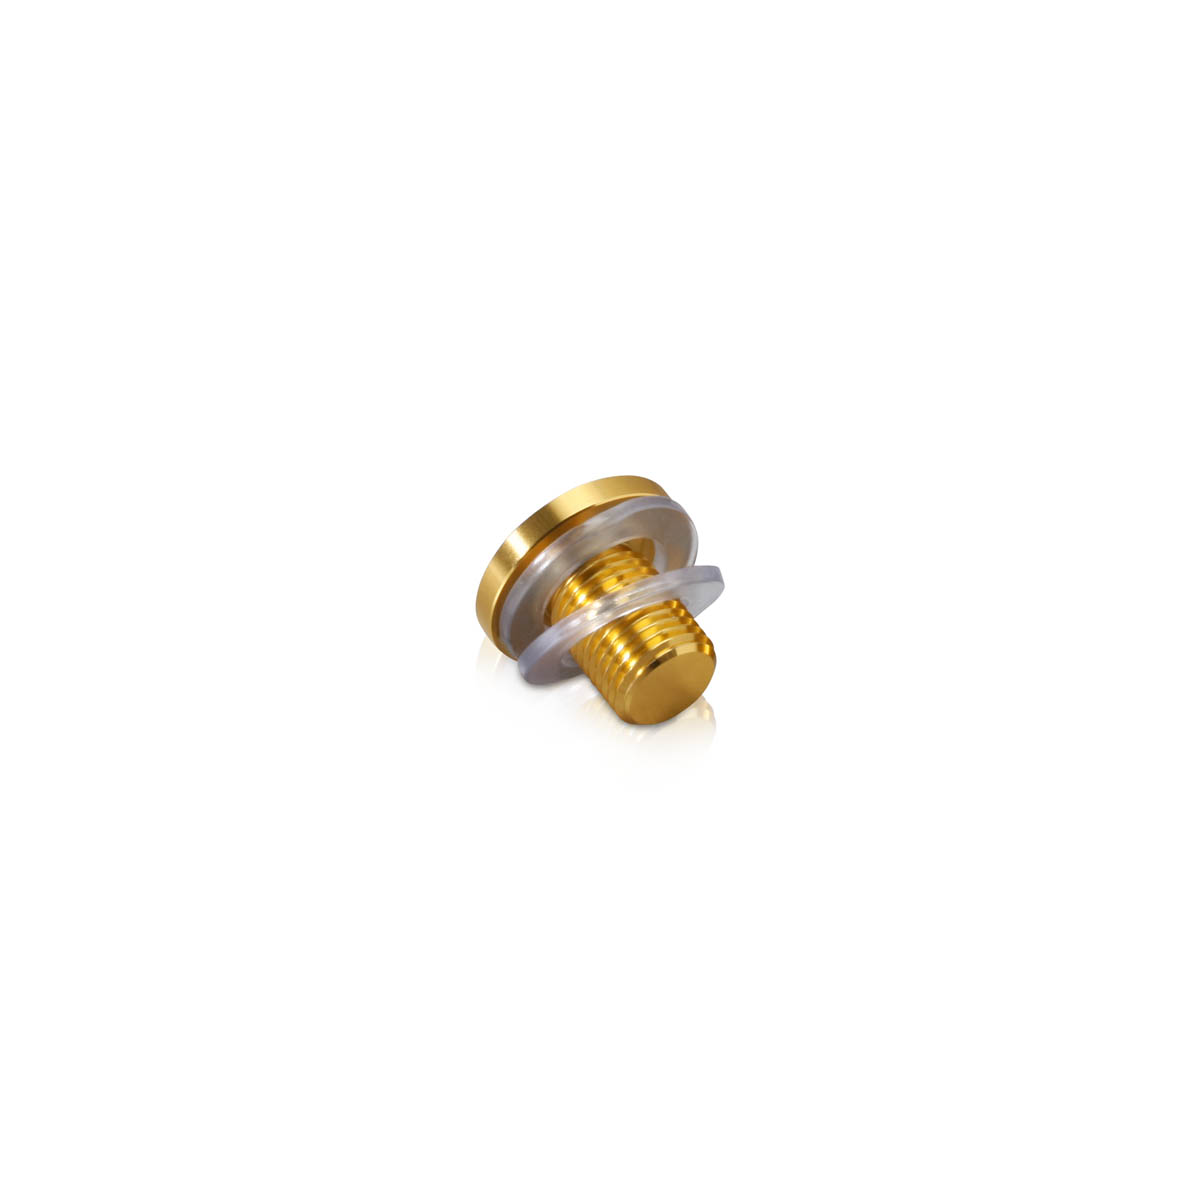 AL19-12G Head replacement for Mbs-Standoffs 3/4'' Diameter x 1/2'' Barrel Length, Aluminum Gold Anodized Finish Standoffs (Includes 2 Silicone Washers).